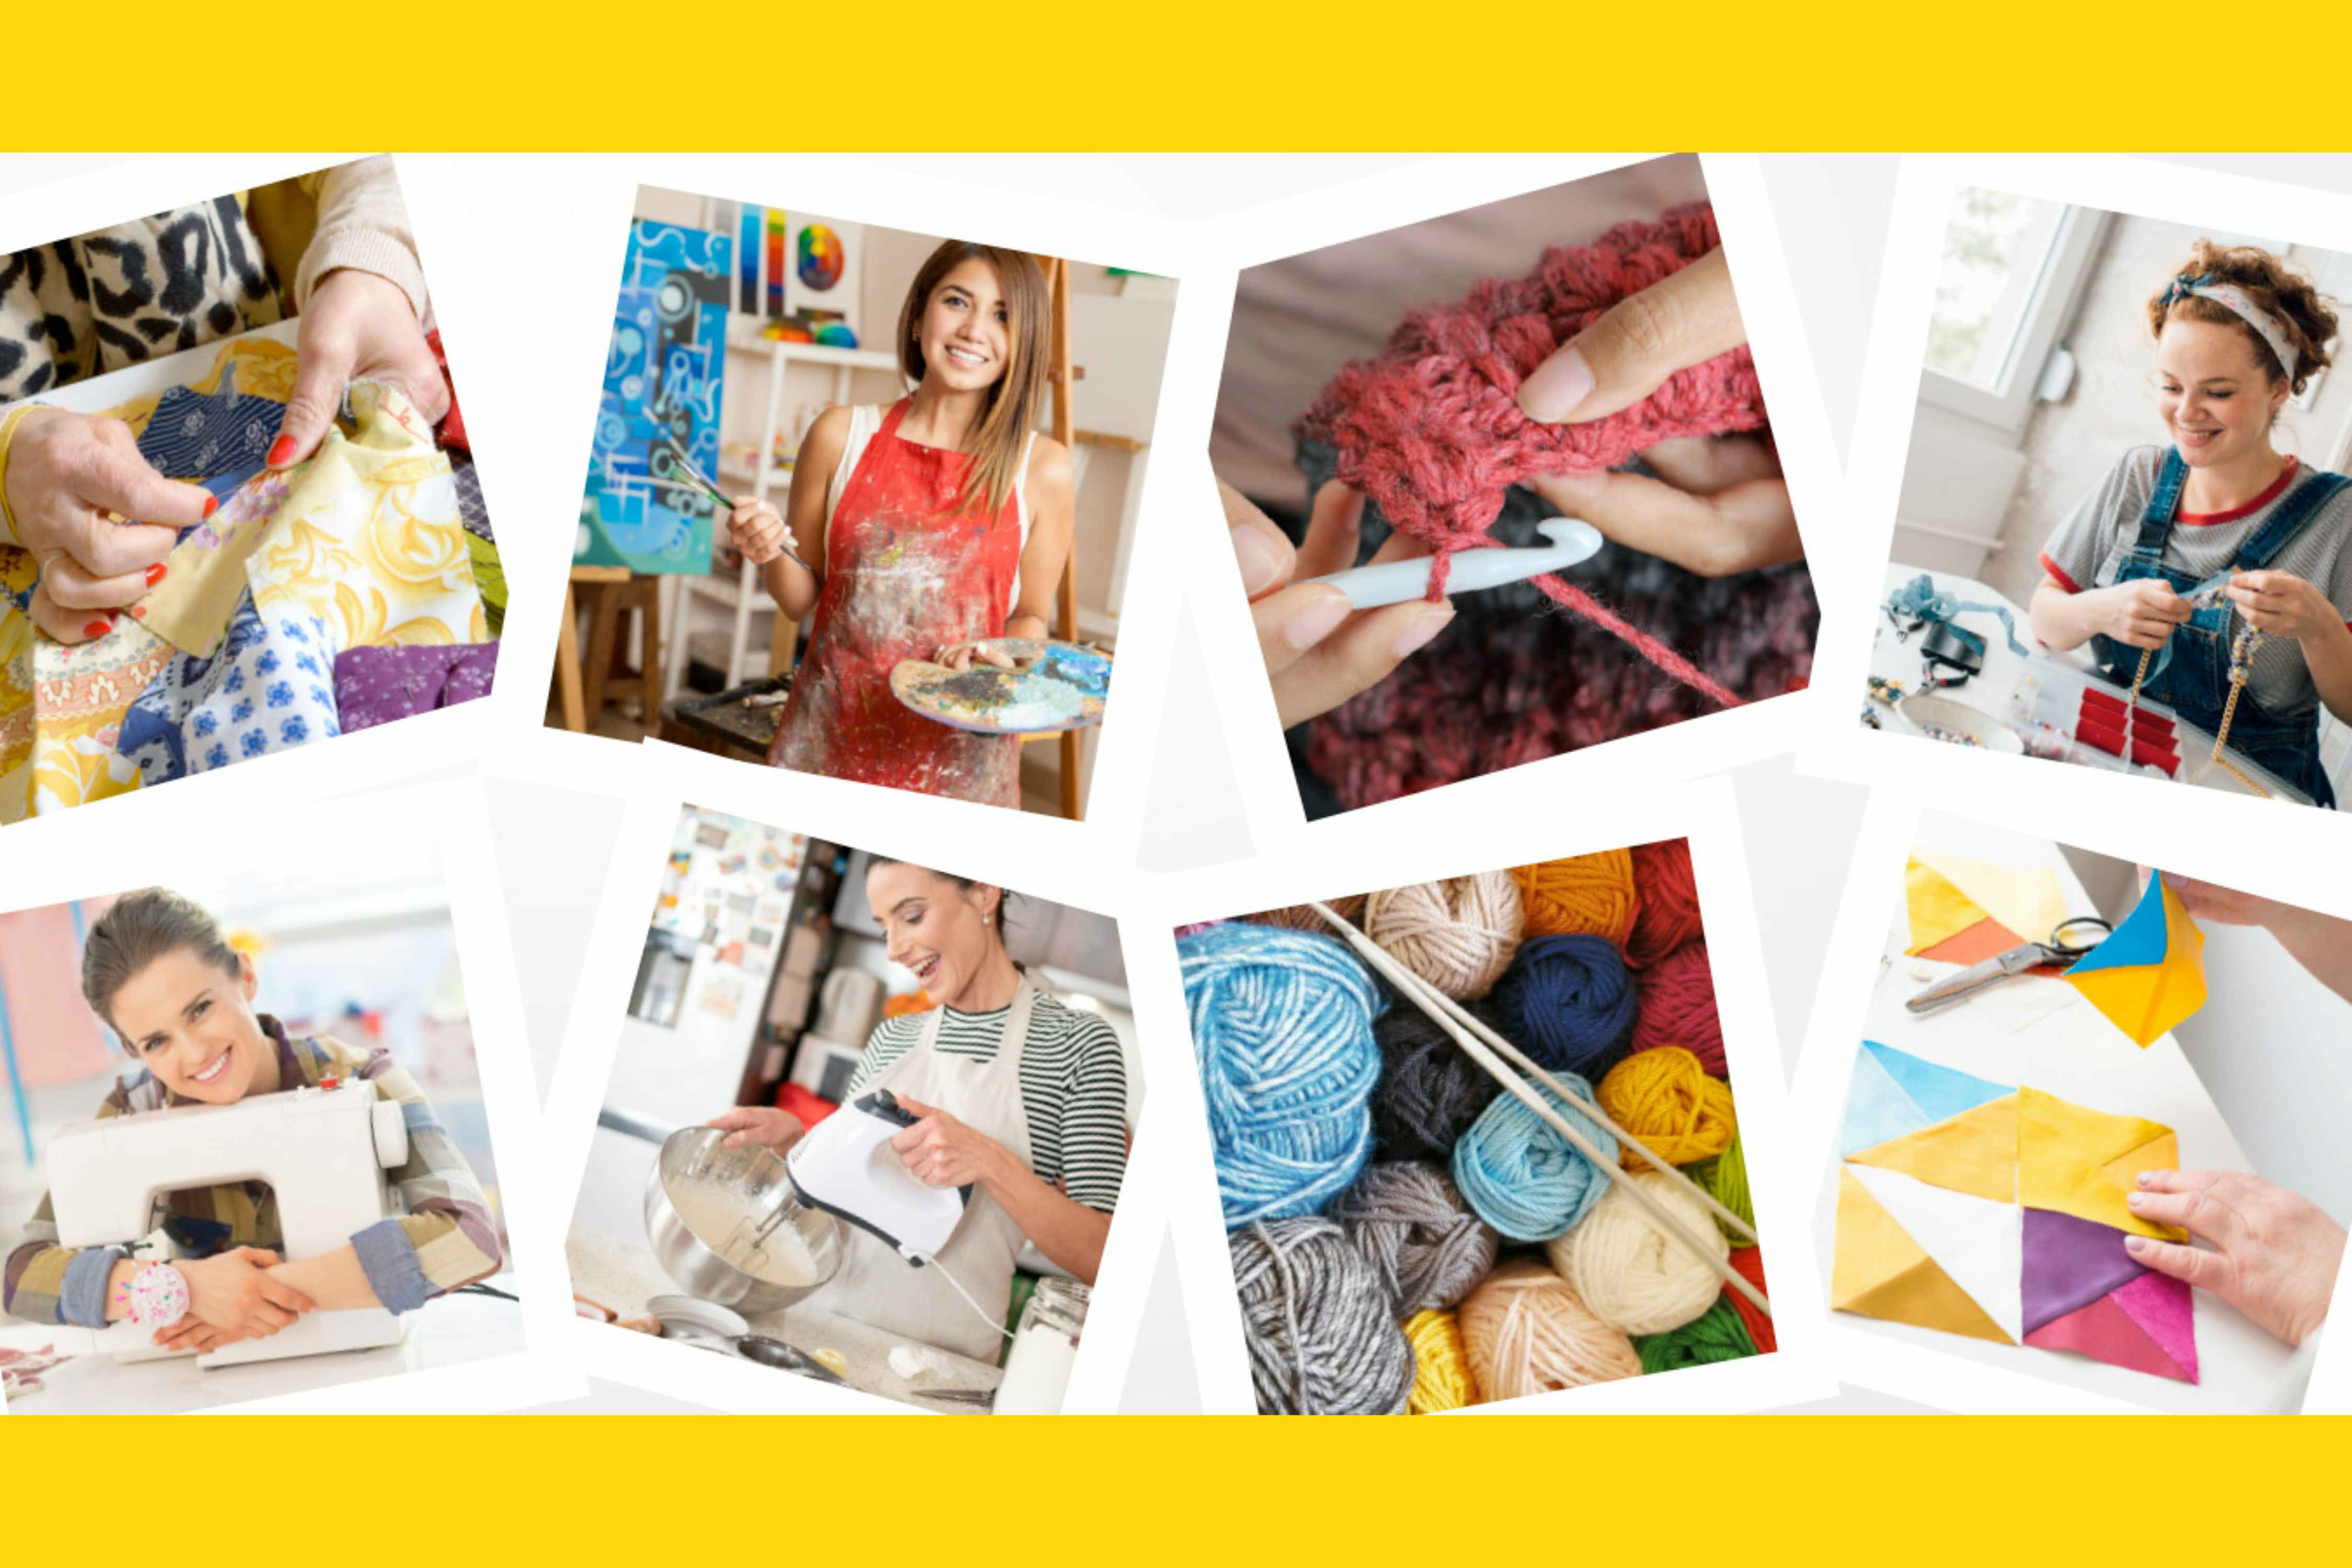 1 Year of Online Craft Classes for Just $0.69 With Craftsy (Reg. $113)